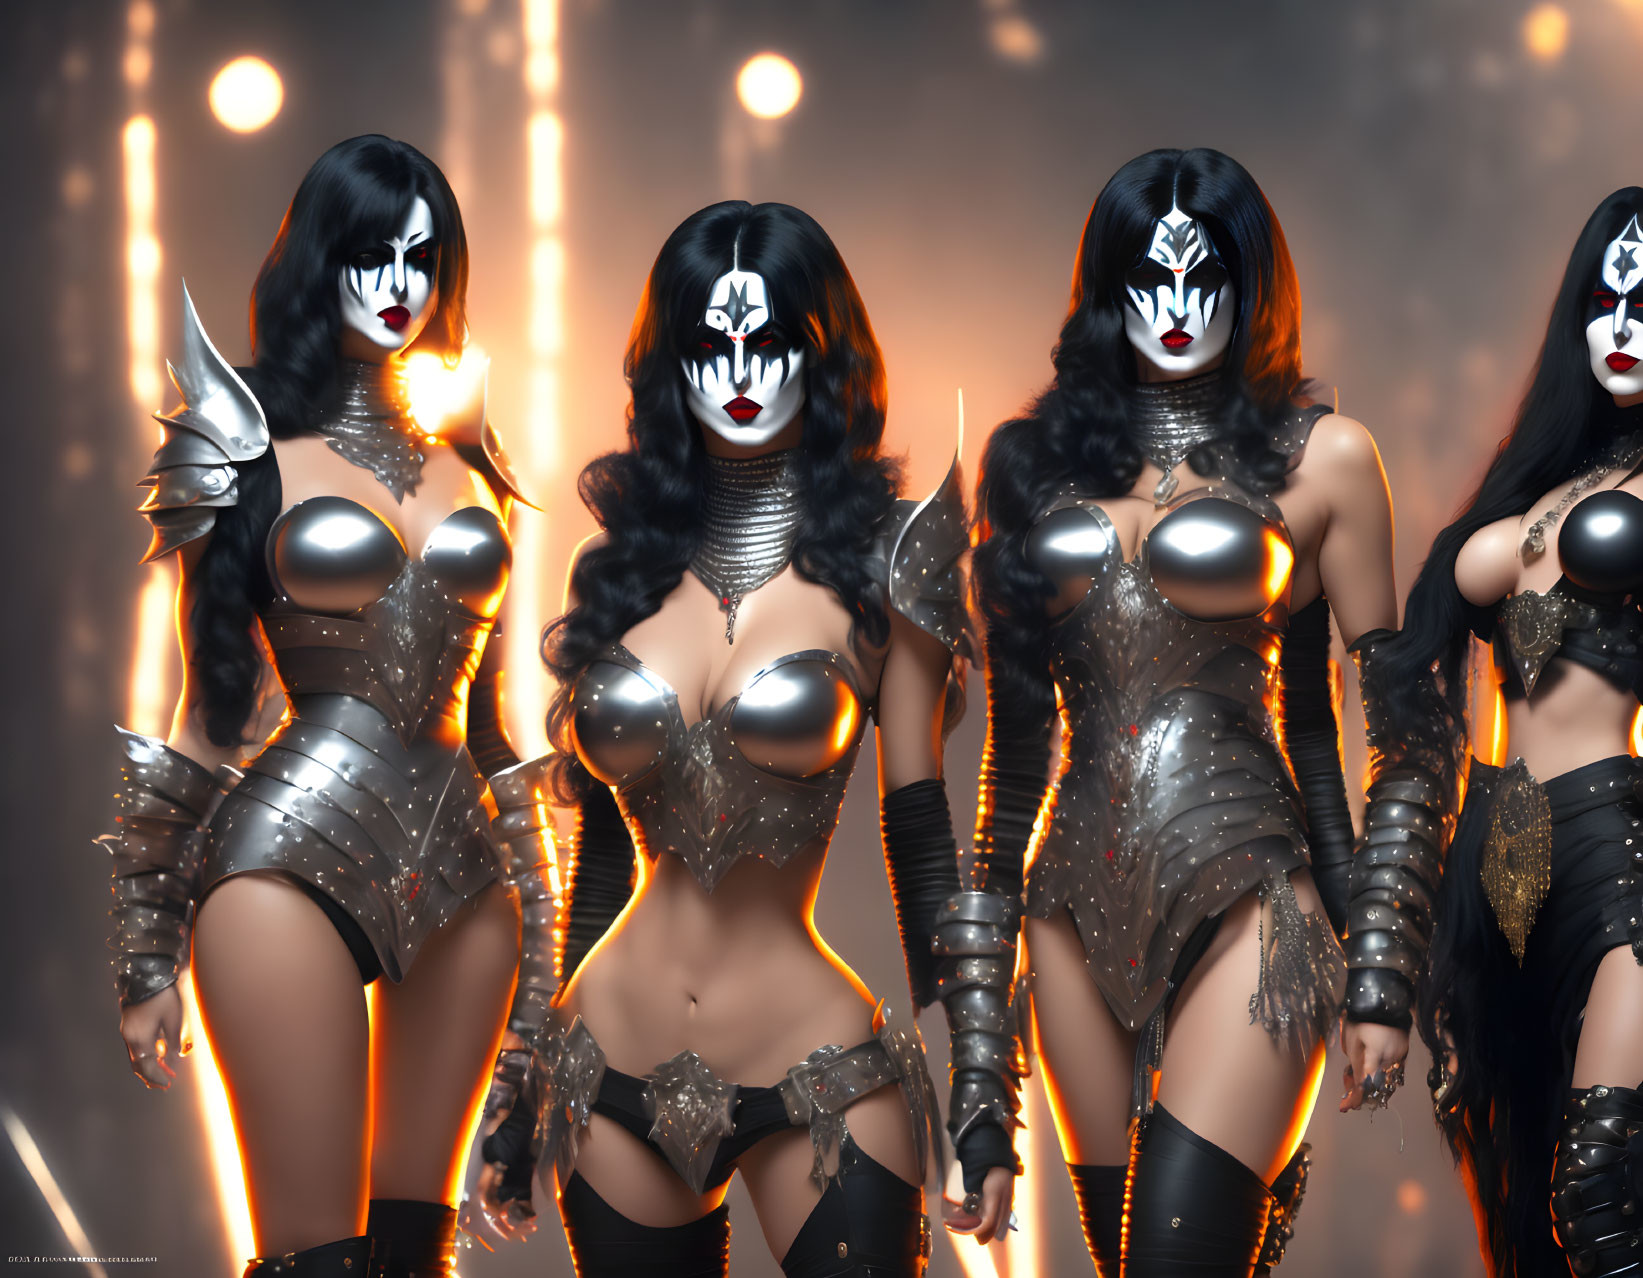 Four individuals in KISS-inspired makeup and costumes with metallic armor elements on smoky backdrop